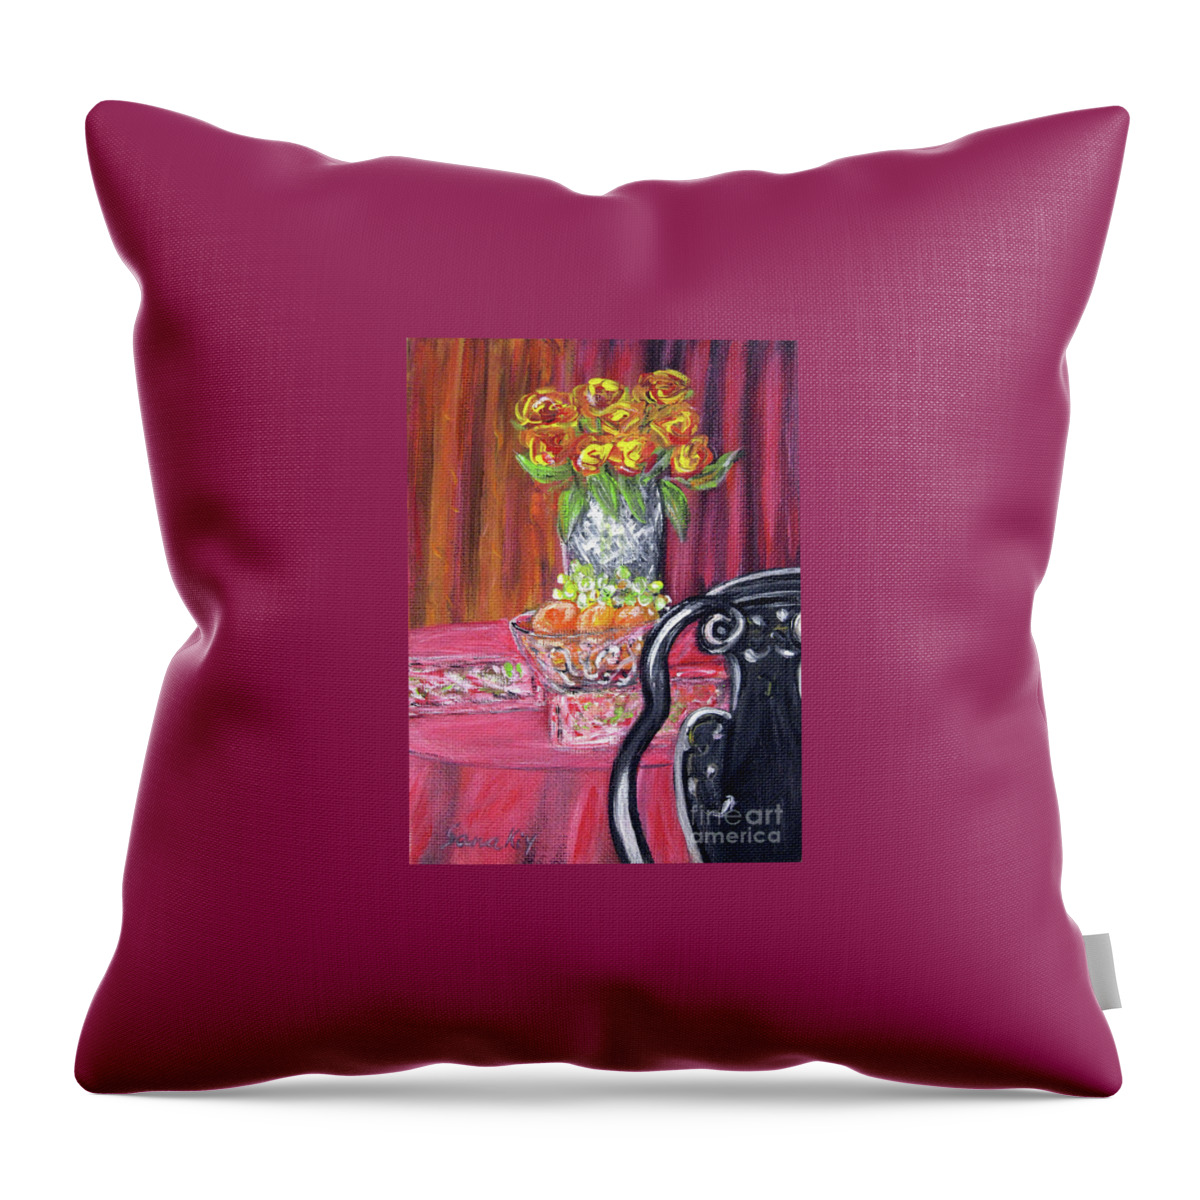 Still Life Throw Pillow featuring the painting Still Life. Welcome by Oksana Semenchenko